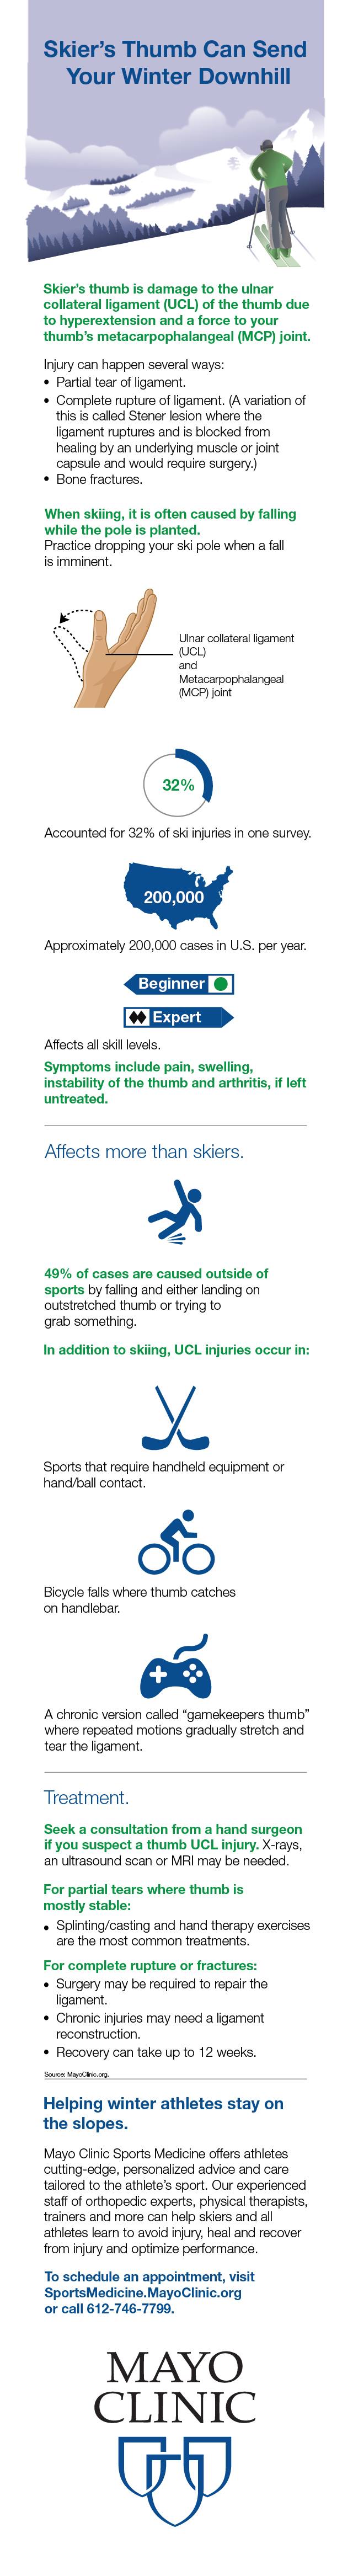 infographic for skier's thumb can send your winter downhill